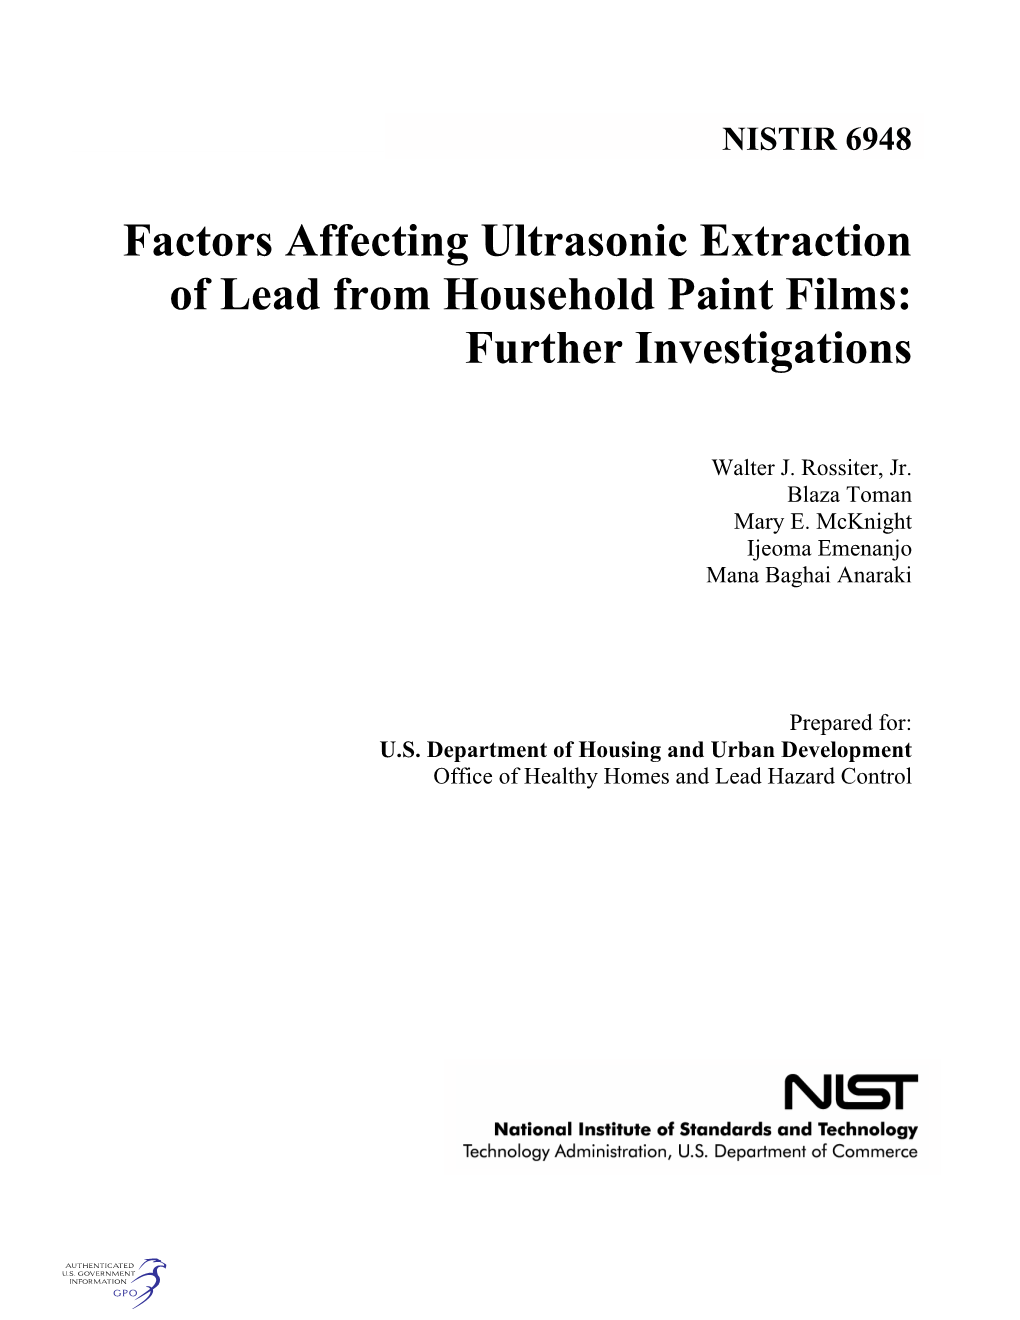 Factors Affecting Ultrasonic Extraction of Lead from Household Paint Films: Further Investigations